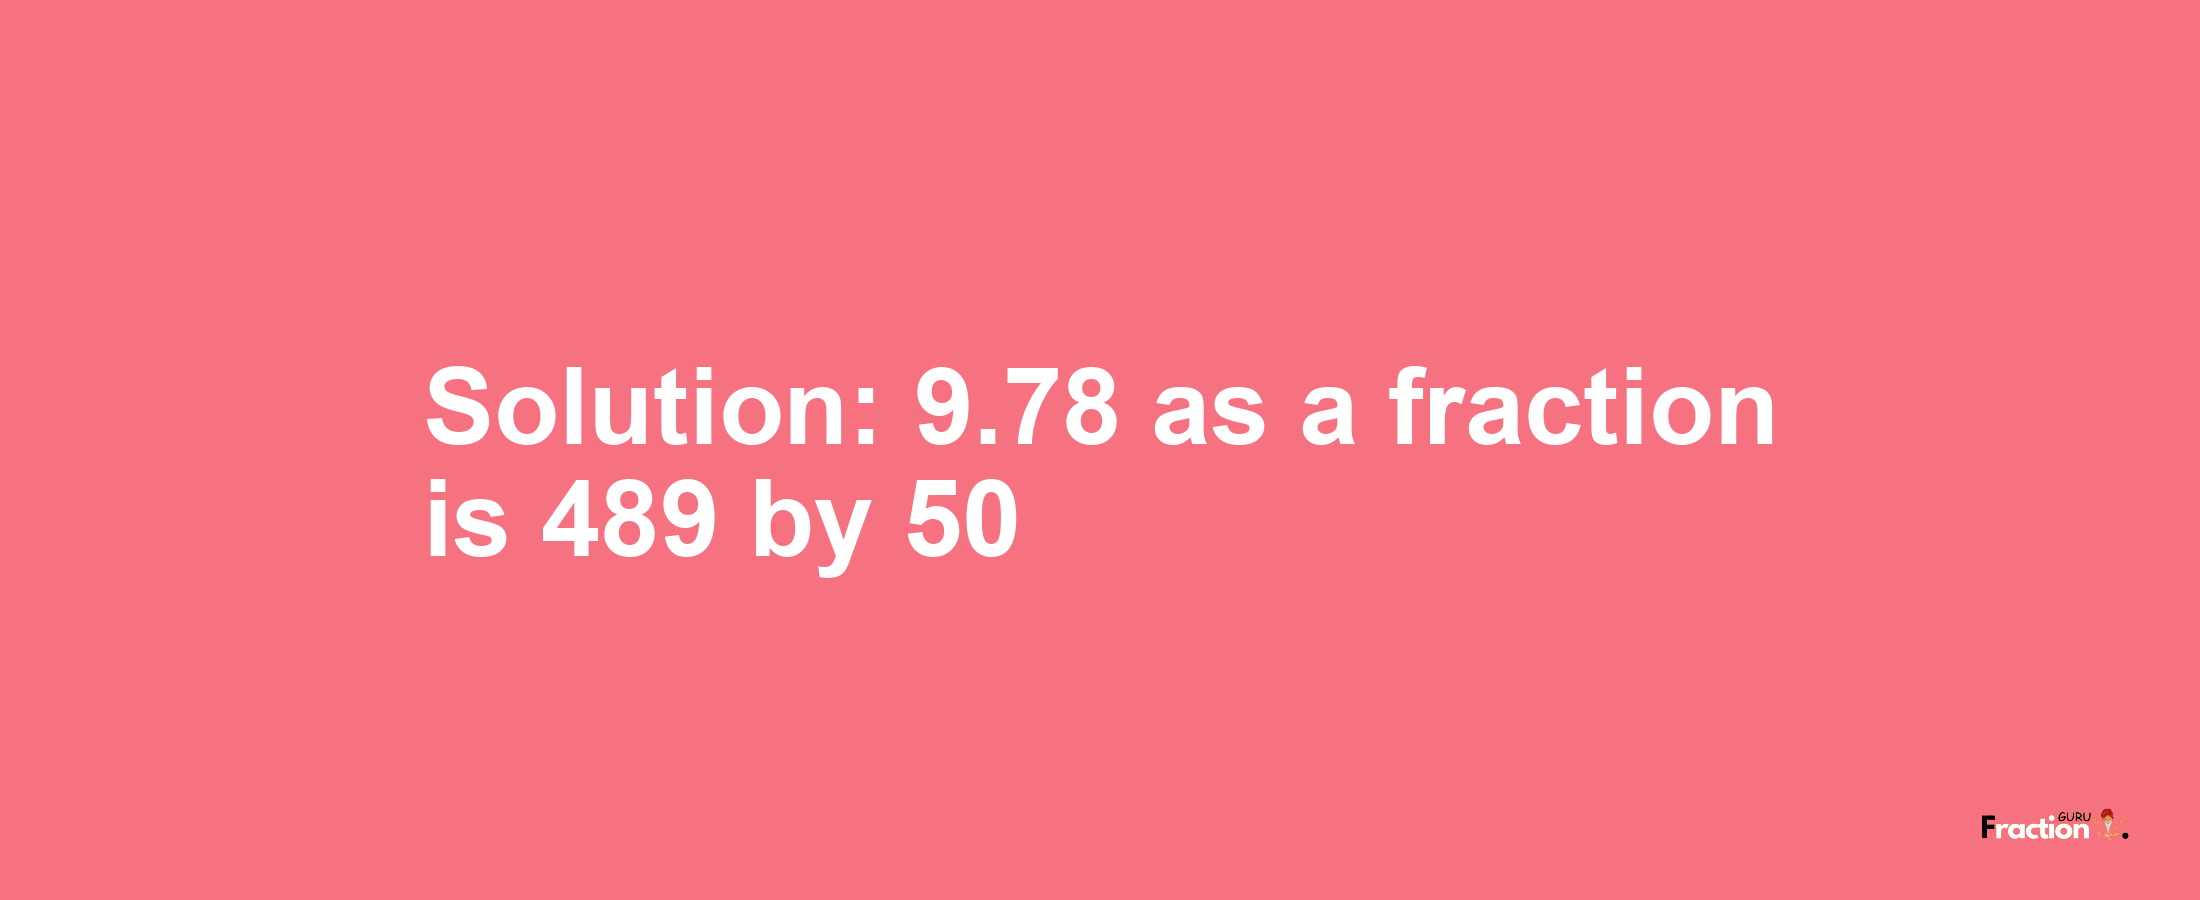 Solution:9.78 as a fraction is 489/50